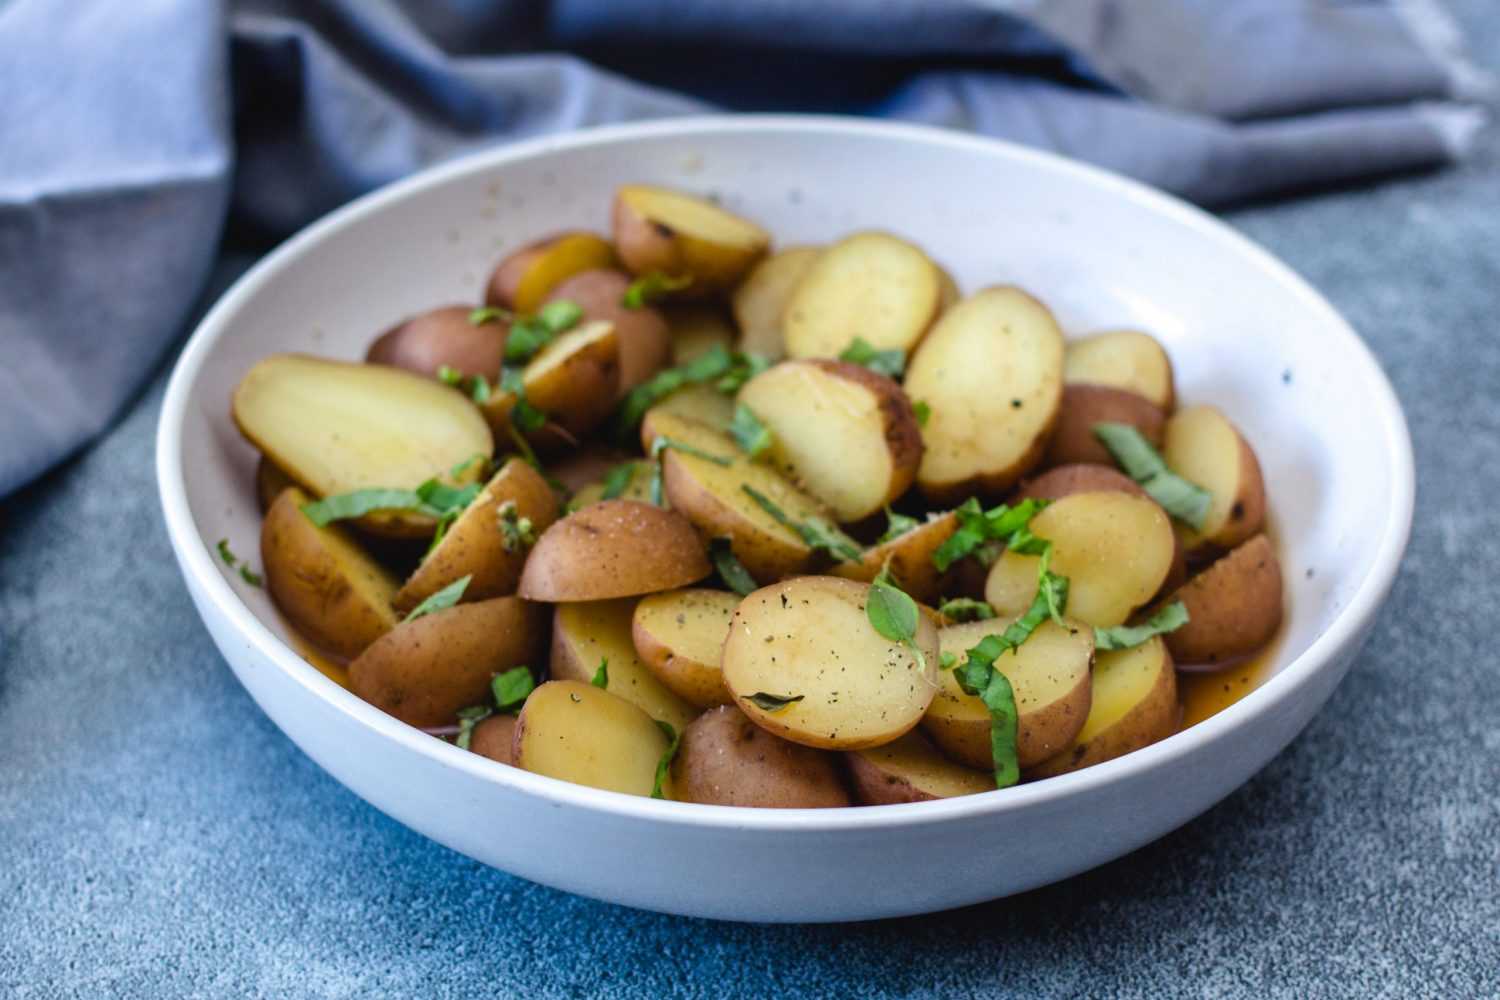 https://www.corriecooks.com/wp-content/uploads/2019/03/baked-potatoes-2-2-scaled.jpg